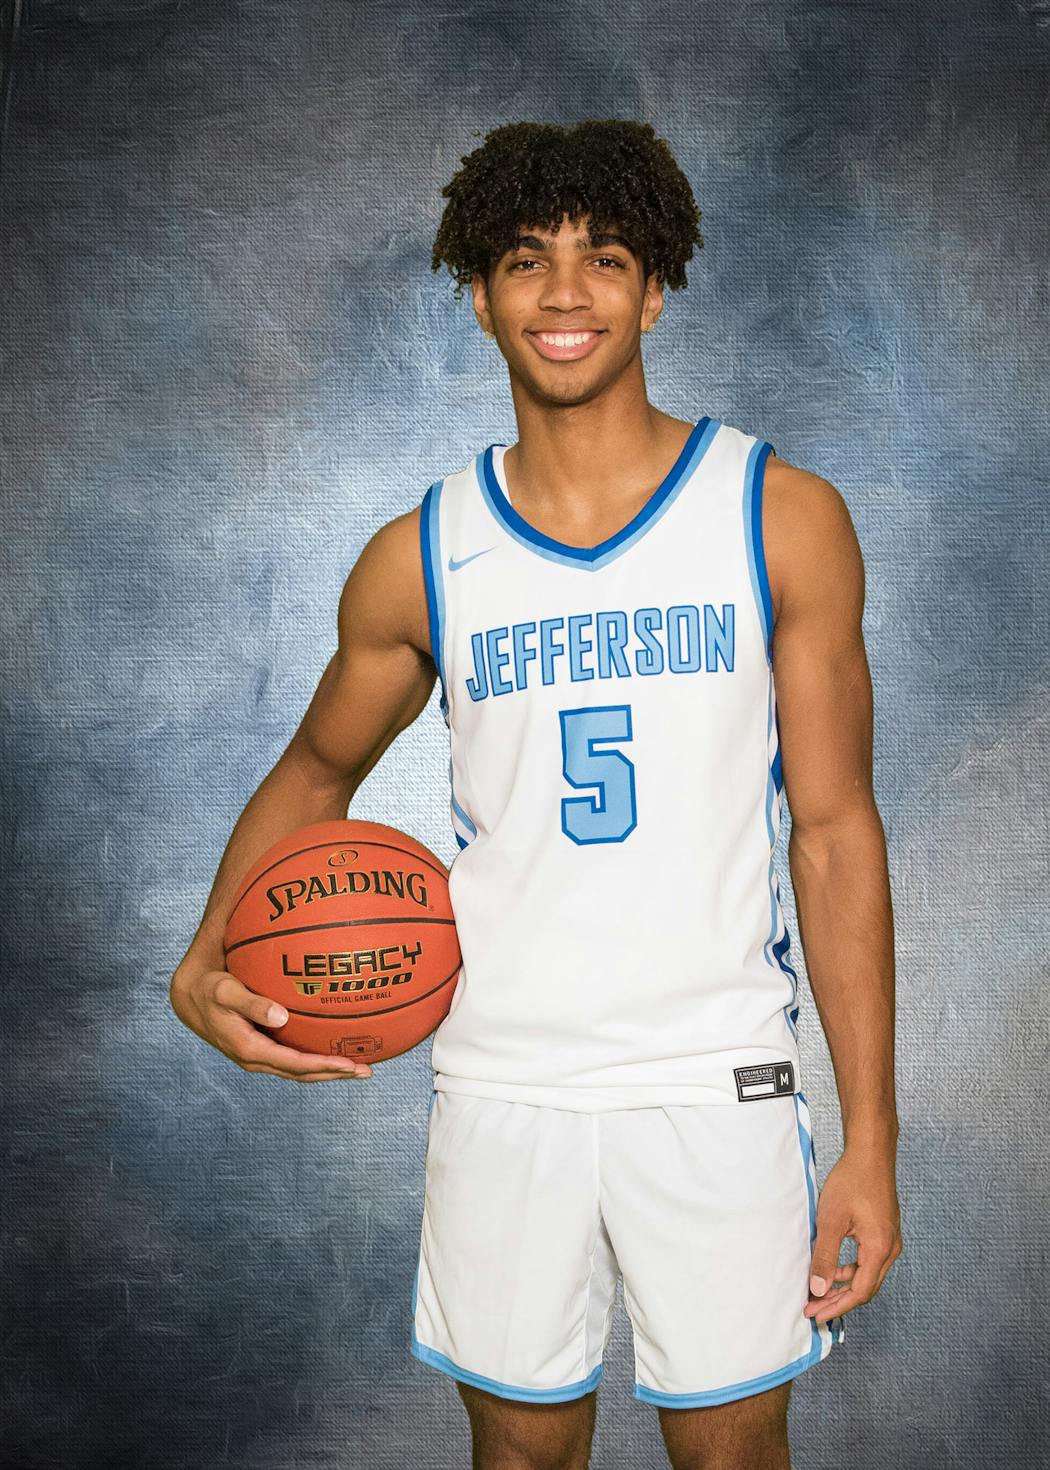 Daniel Freitag is a standout for Bloomington Jefferson in basketball and football.